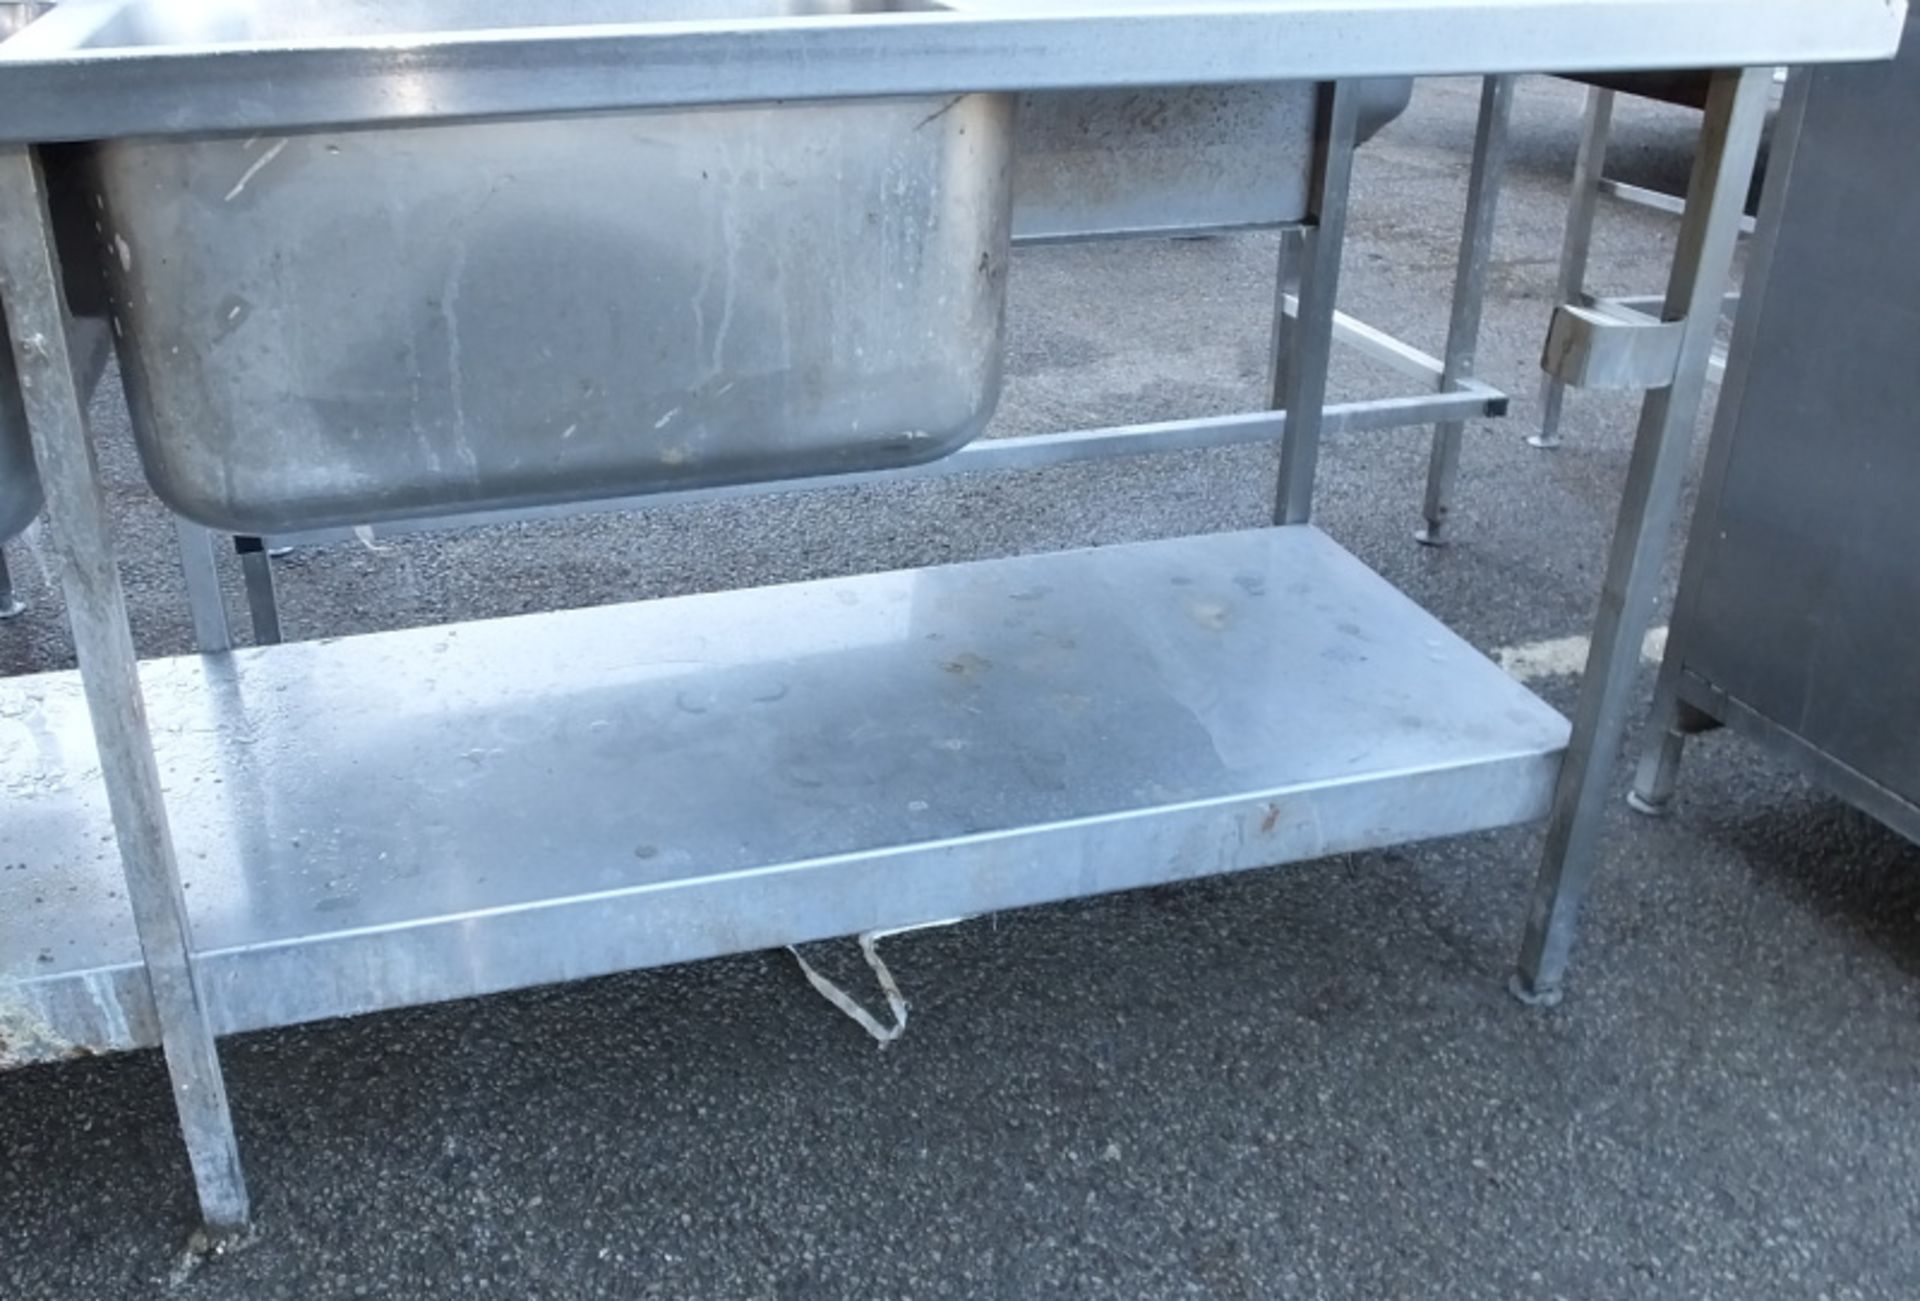 Stainless Steel Double Sink Countertop L 2400mm x W 700mm x H 900mm - Image 4 of 5